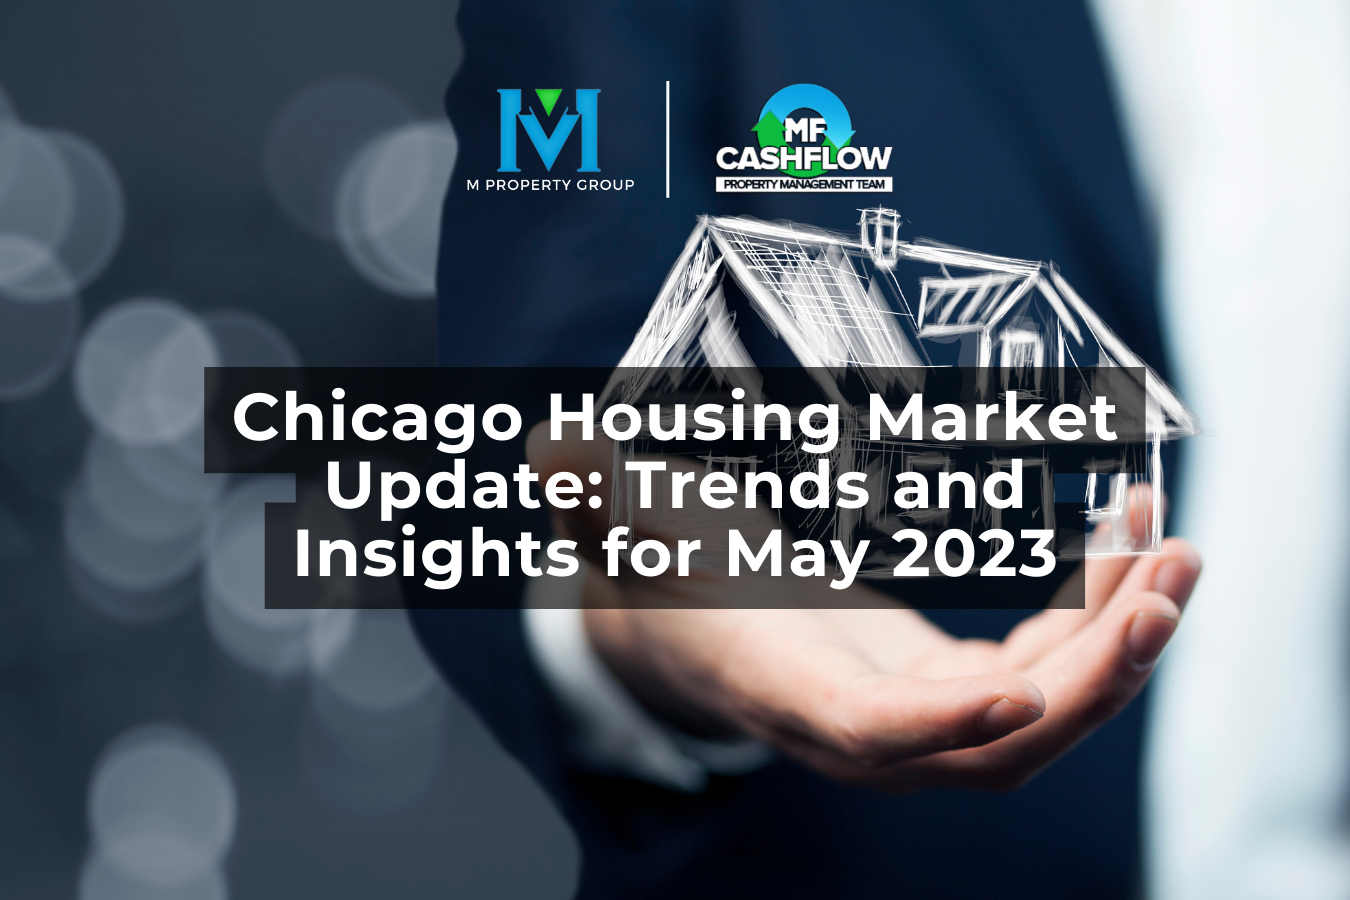 Chicago Housing Market Update: Trends and Insights for May 2023